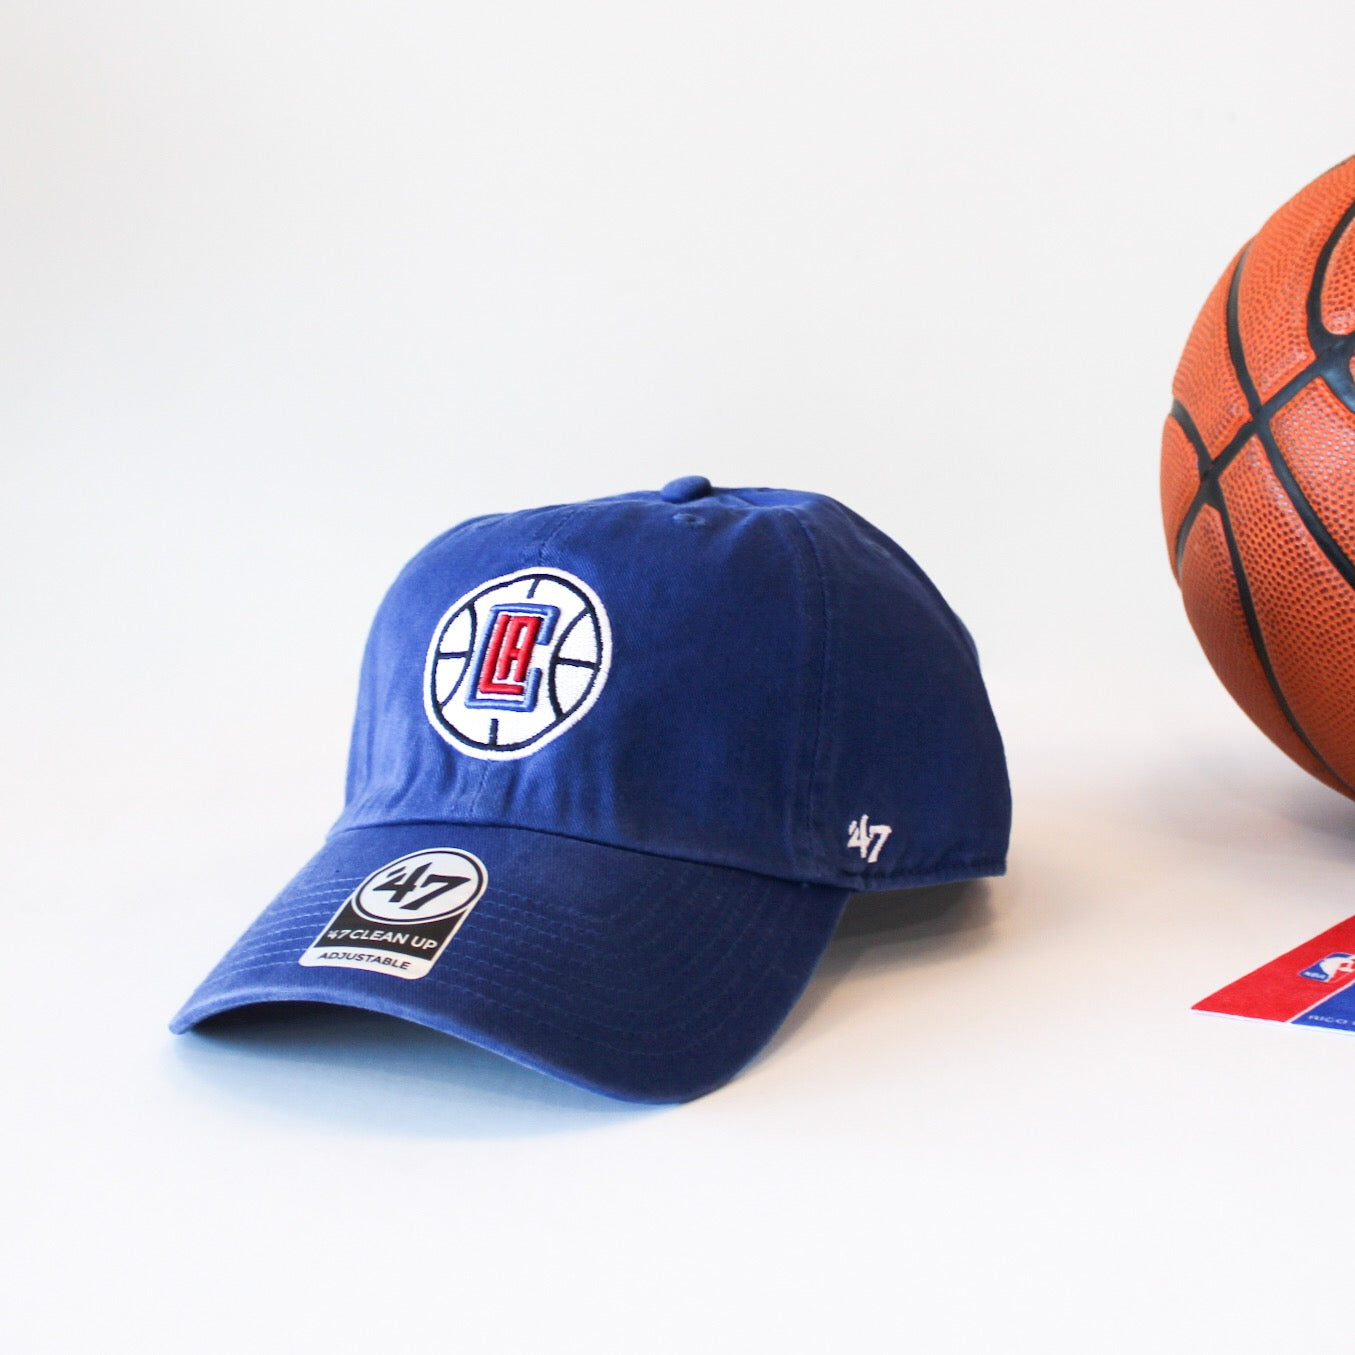 Image of royal blue clean up style hat with embroidered NBA LA Clippers logo on front.